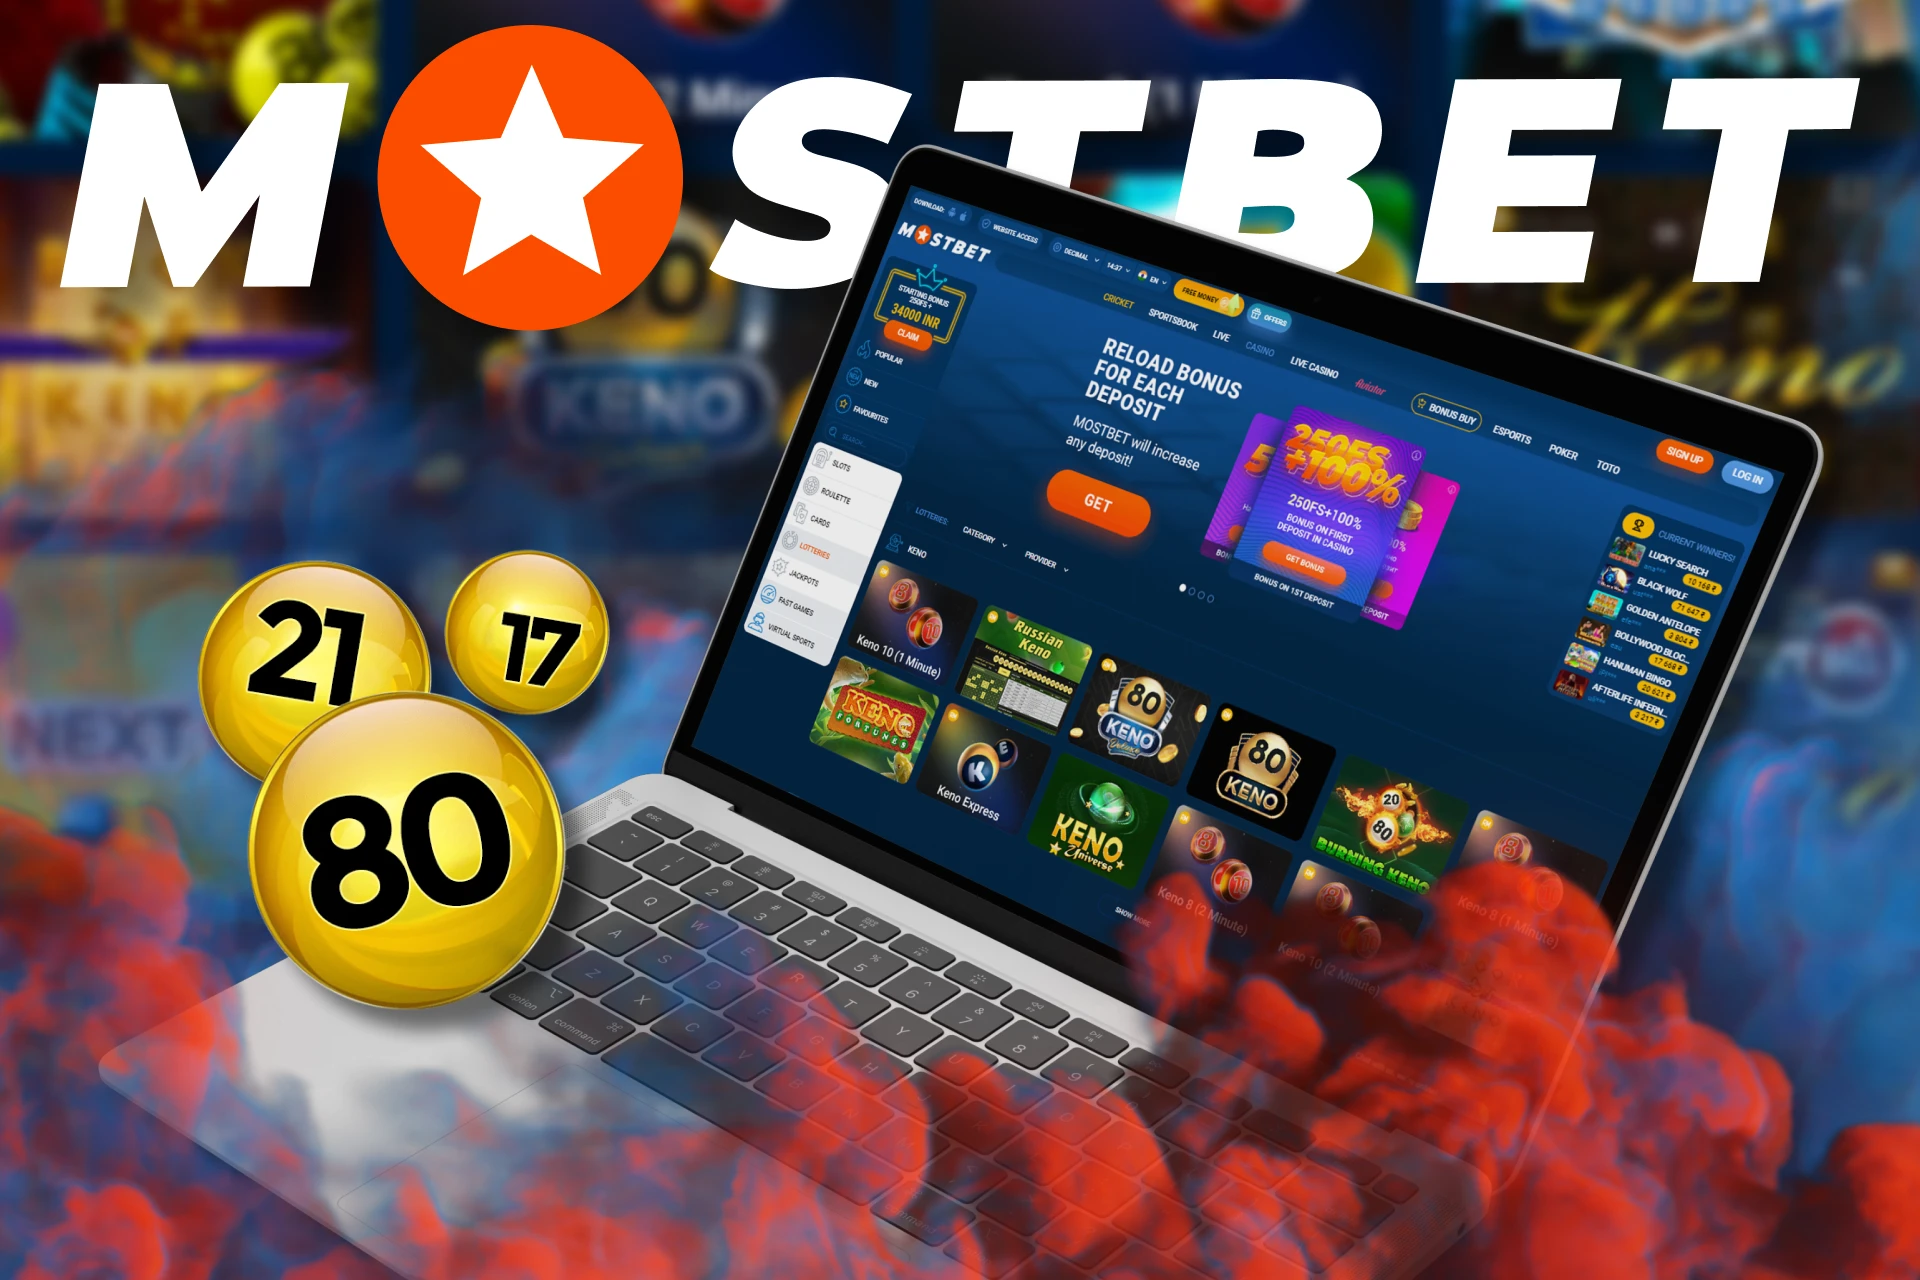 Start playing exciting lotteries with Mostbet.